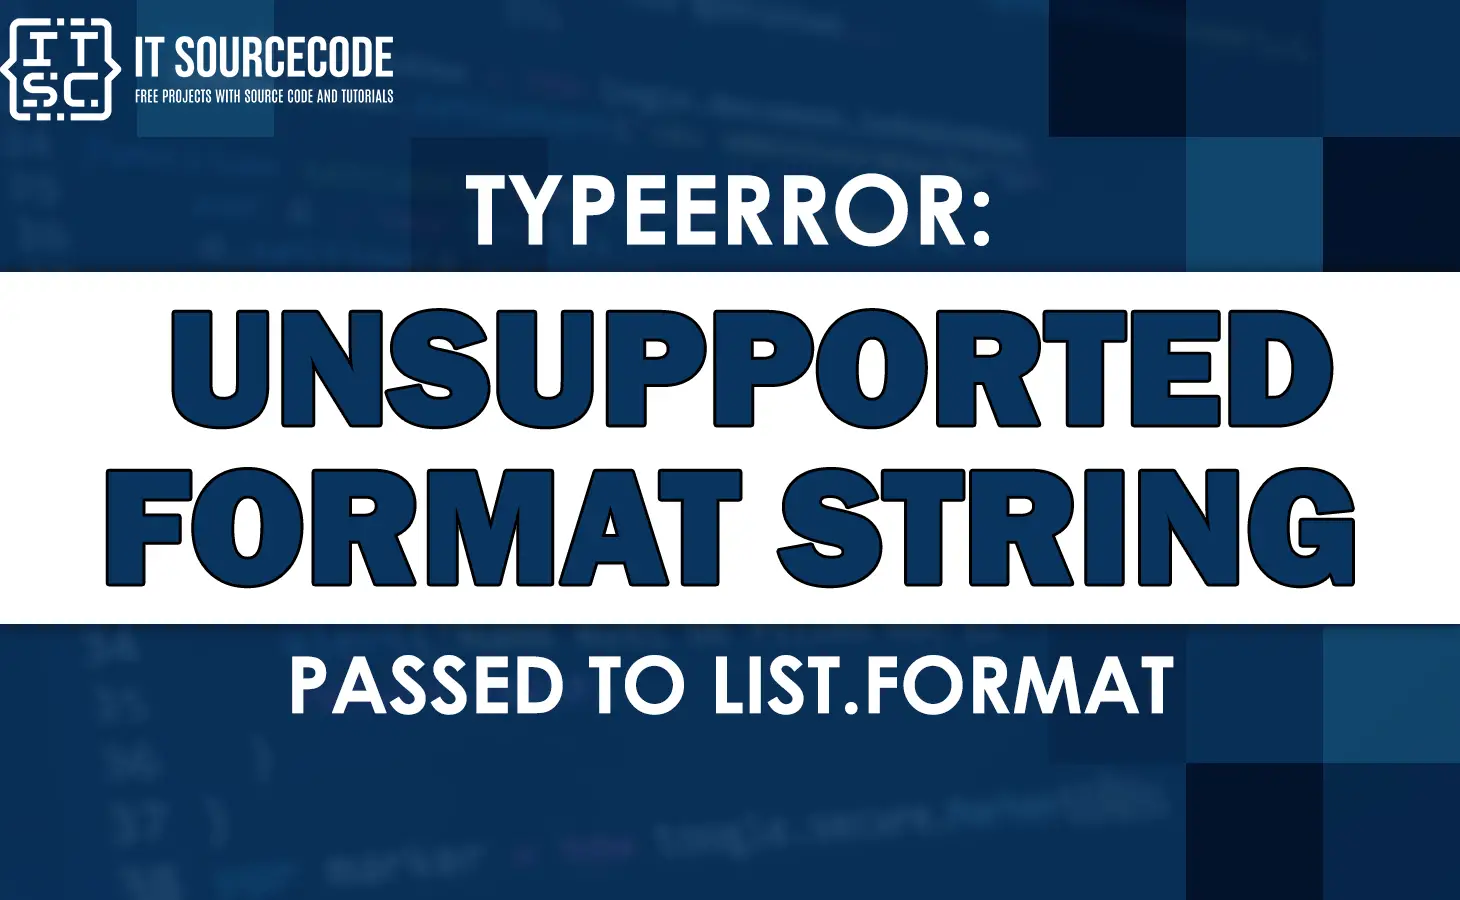 Typeerror unsupported format string passed to list.format